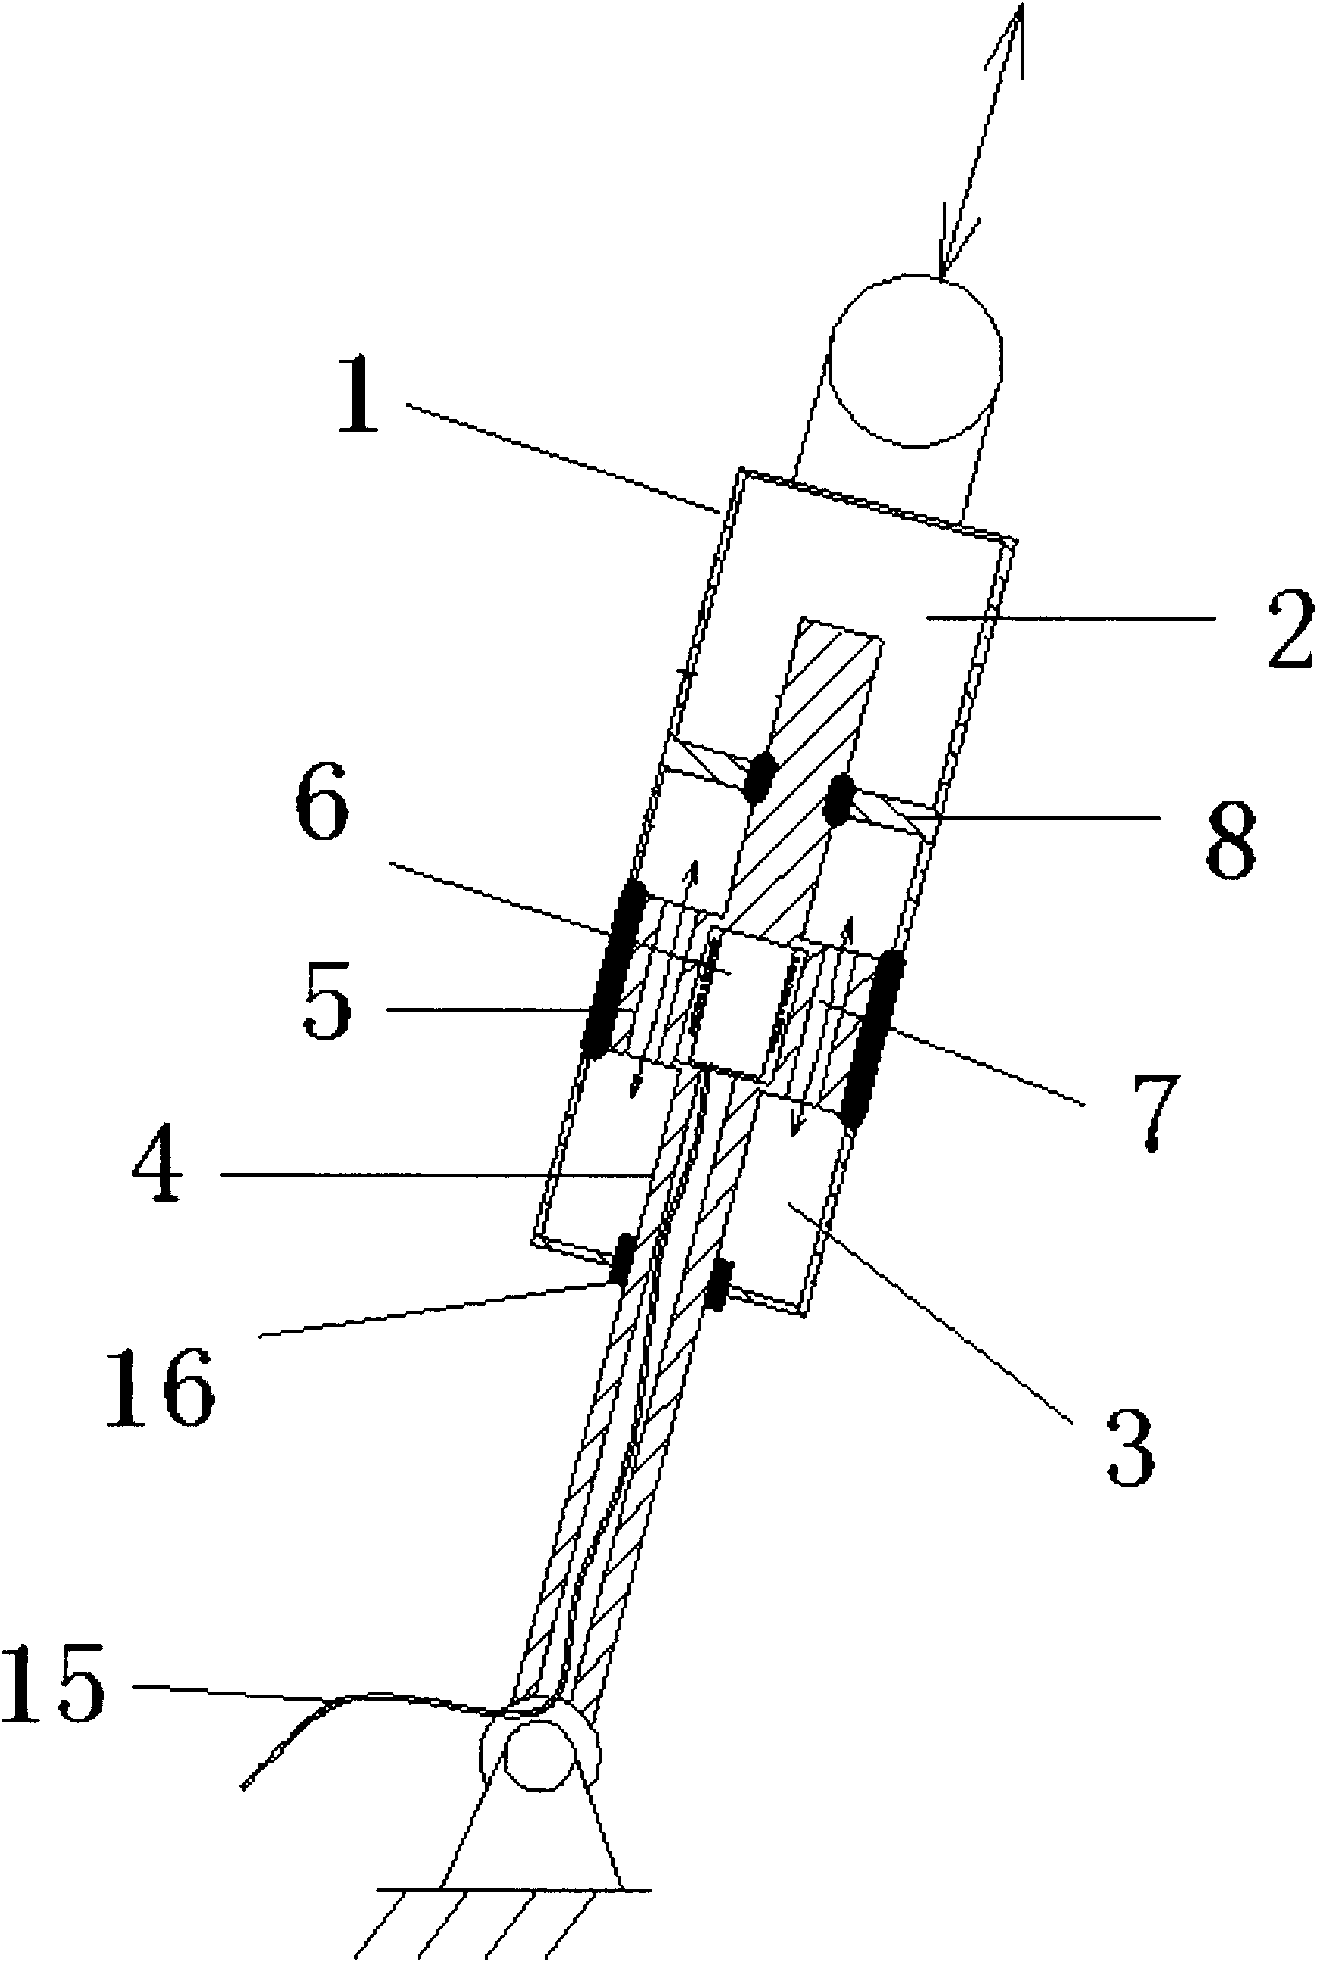 Variable damping shock absorber and drum washing machine using shock absorber